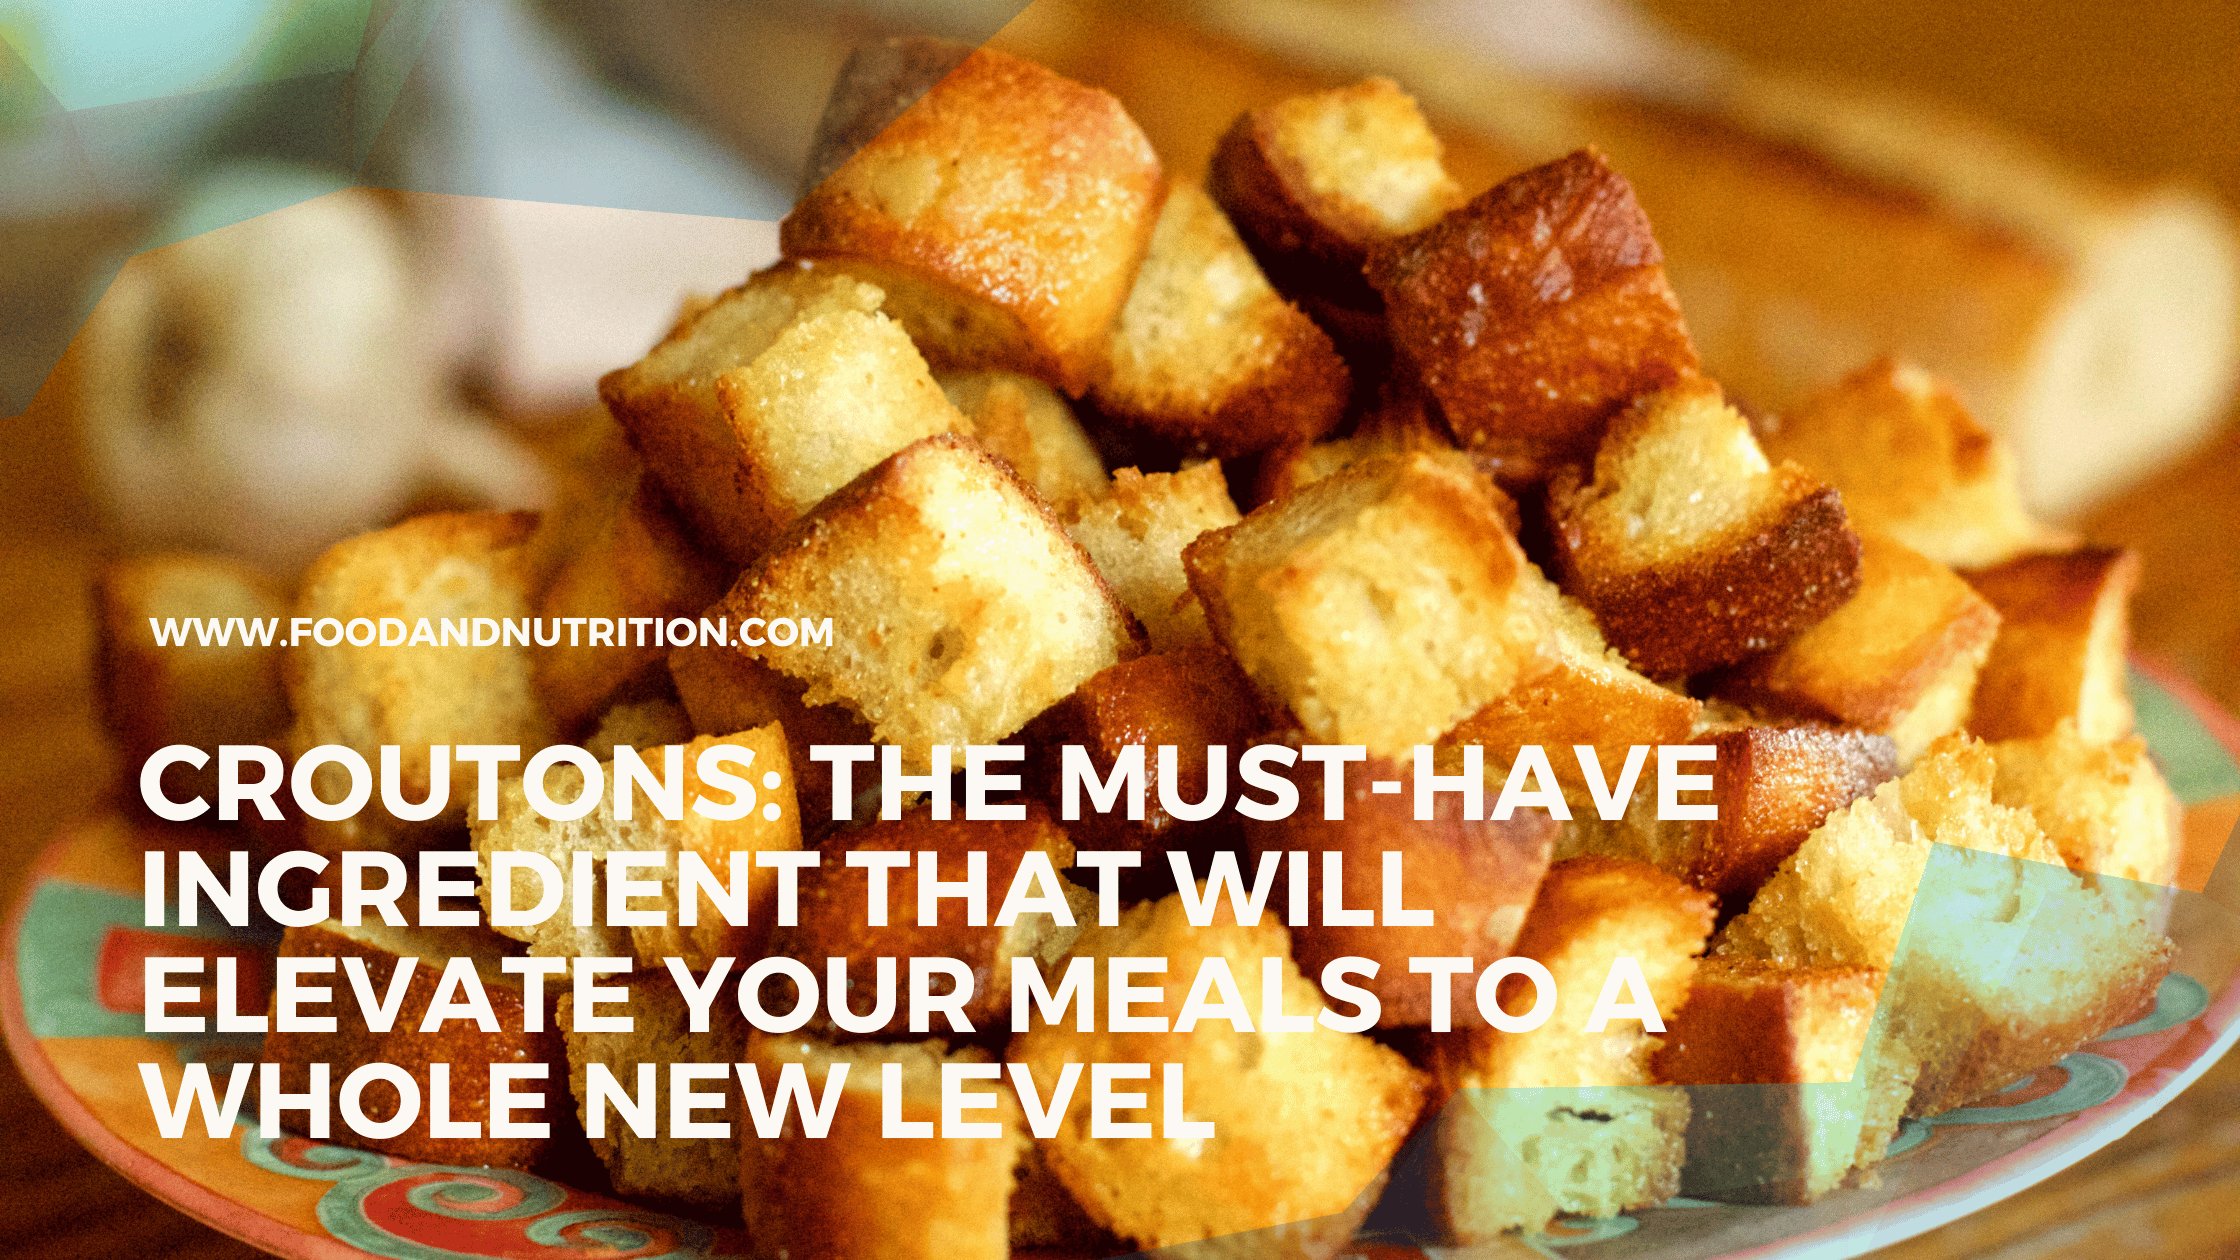 Croutons: The Must-Have Ingredient That Will Elevate Your Meals to a Whole New Level